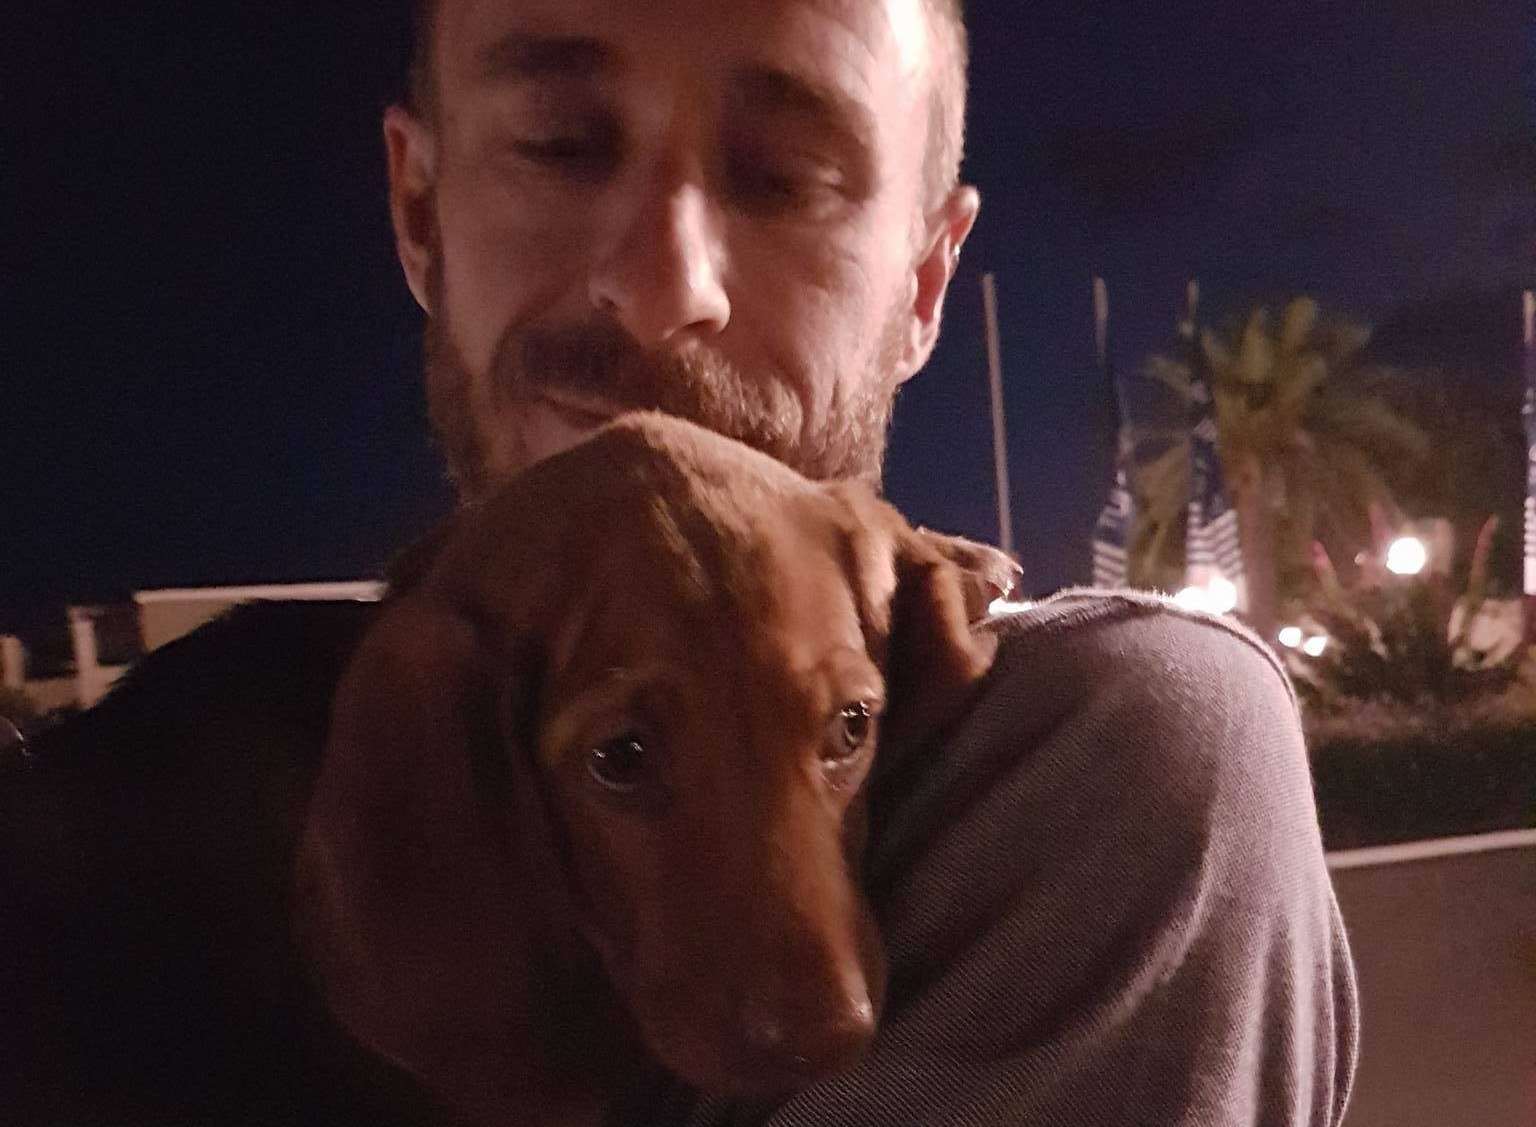 Steven with Luna, the puppy the family want to bring back from Crete